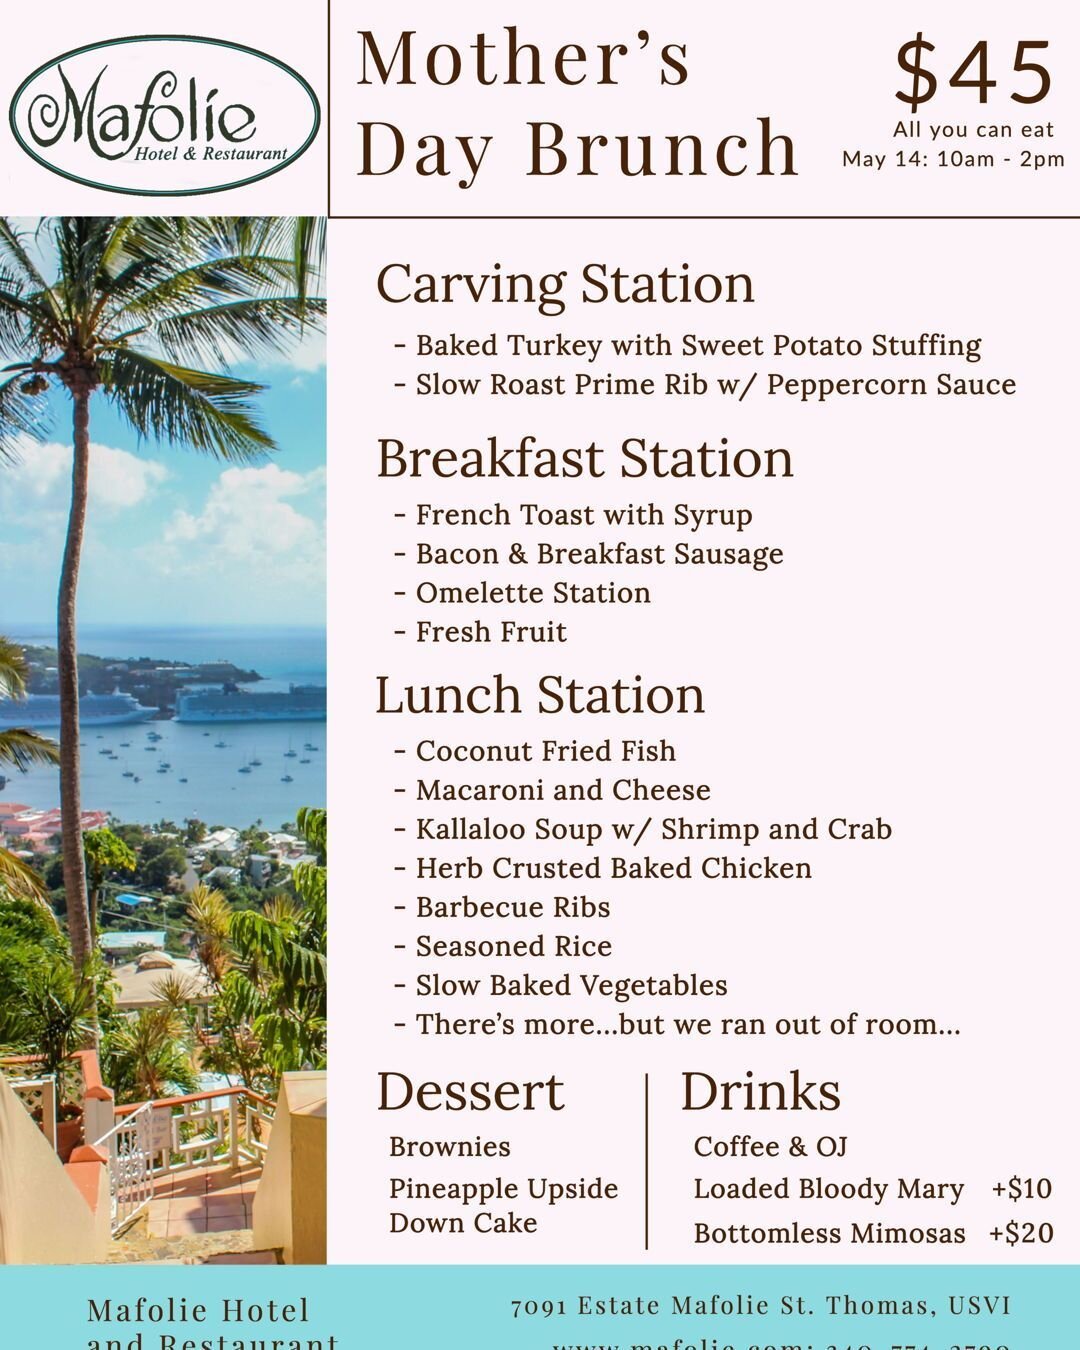 We are excited to annouce Mother's Day Brunch at Mafolie! Come join us as we toast our Mom's overlooking Charlotte Amalie and the Harbor.